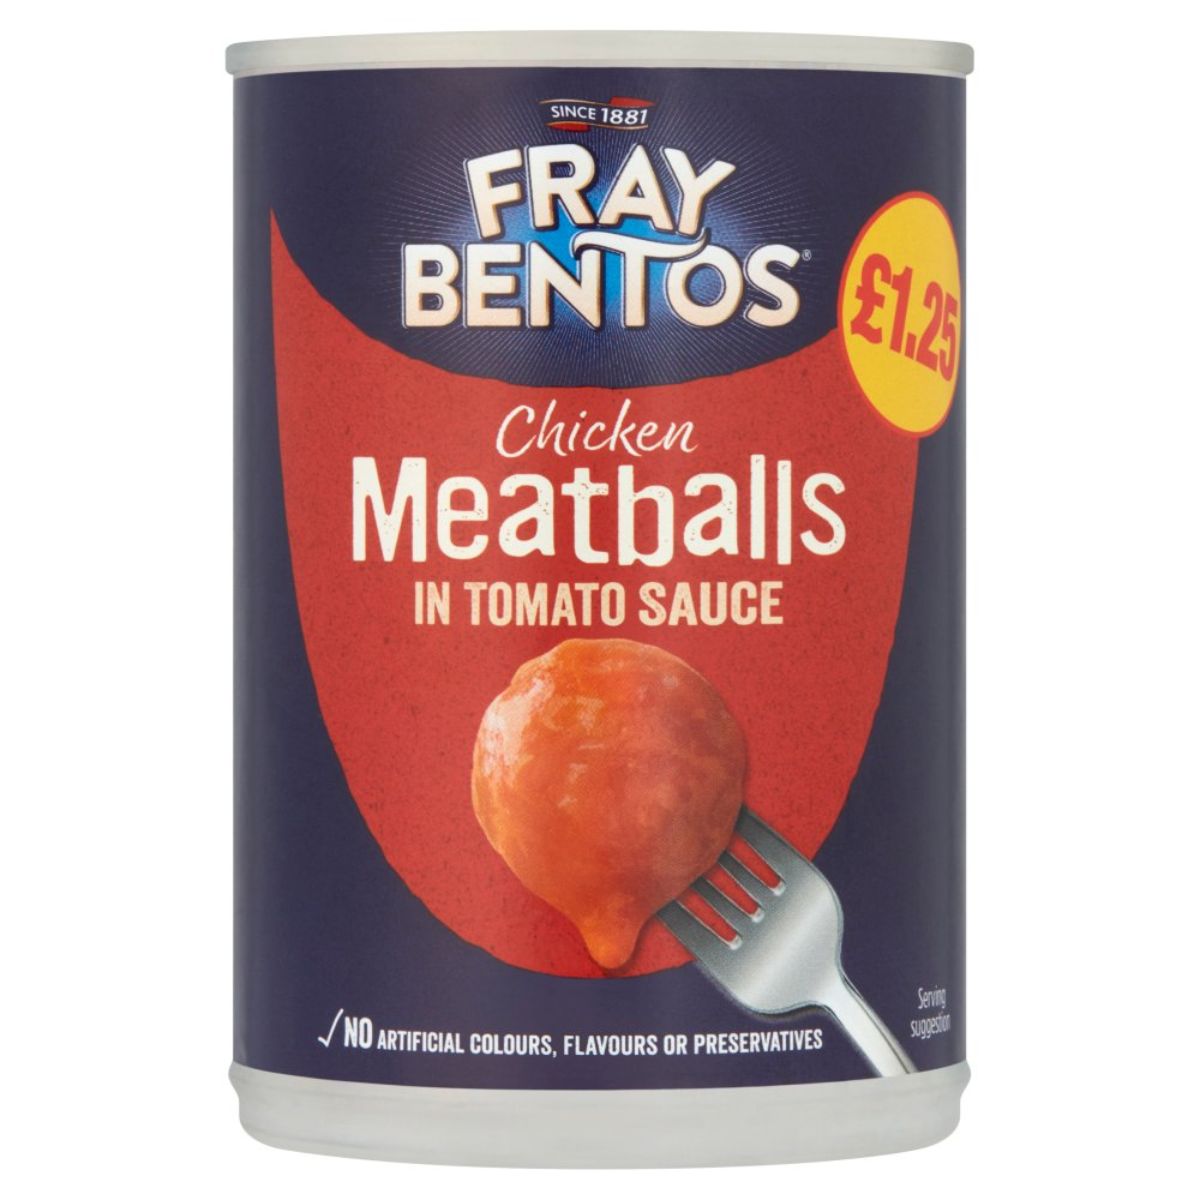 A can of Fray Bentos - Chicken Meatballs in Tomato Sauce - 380g.